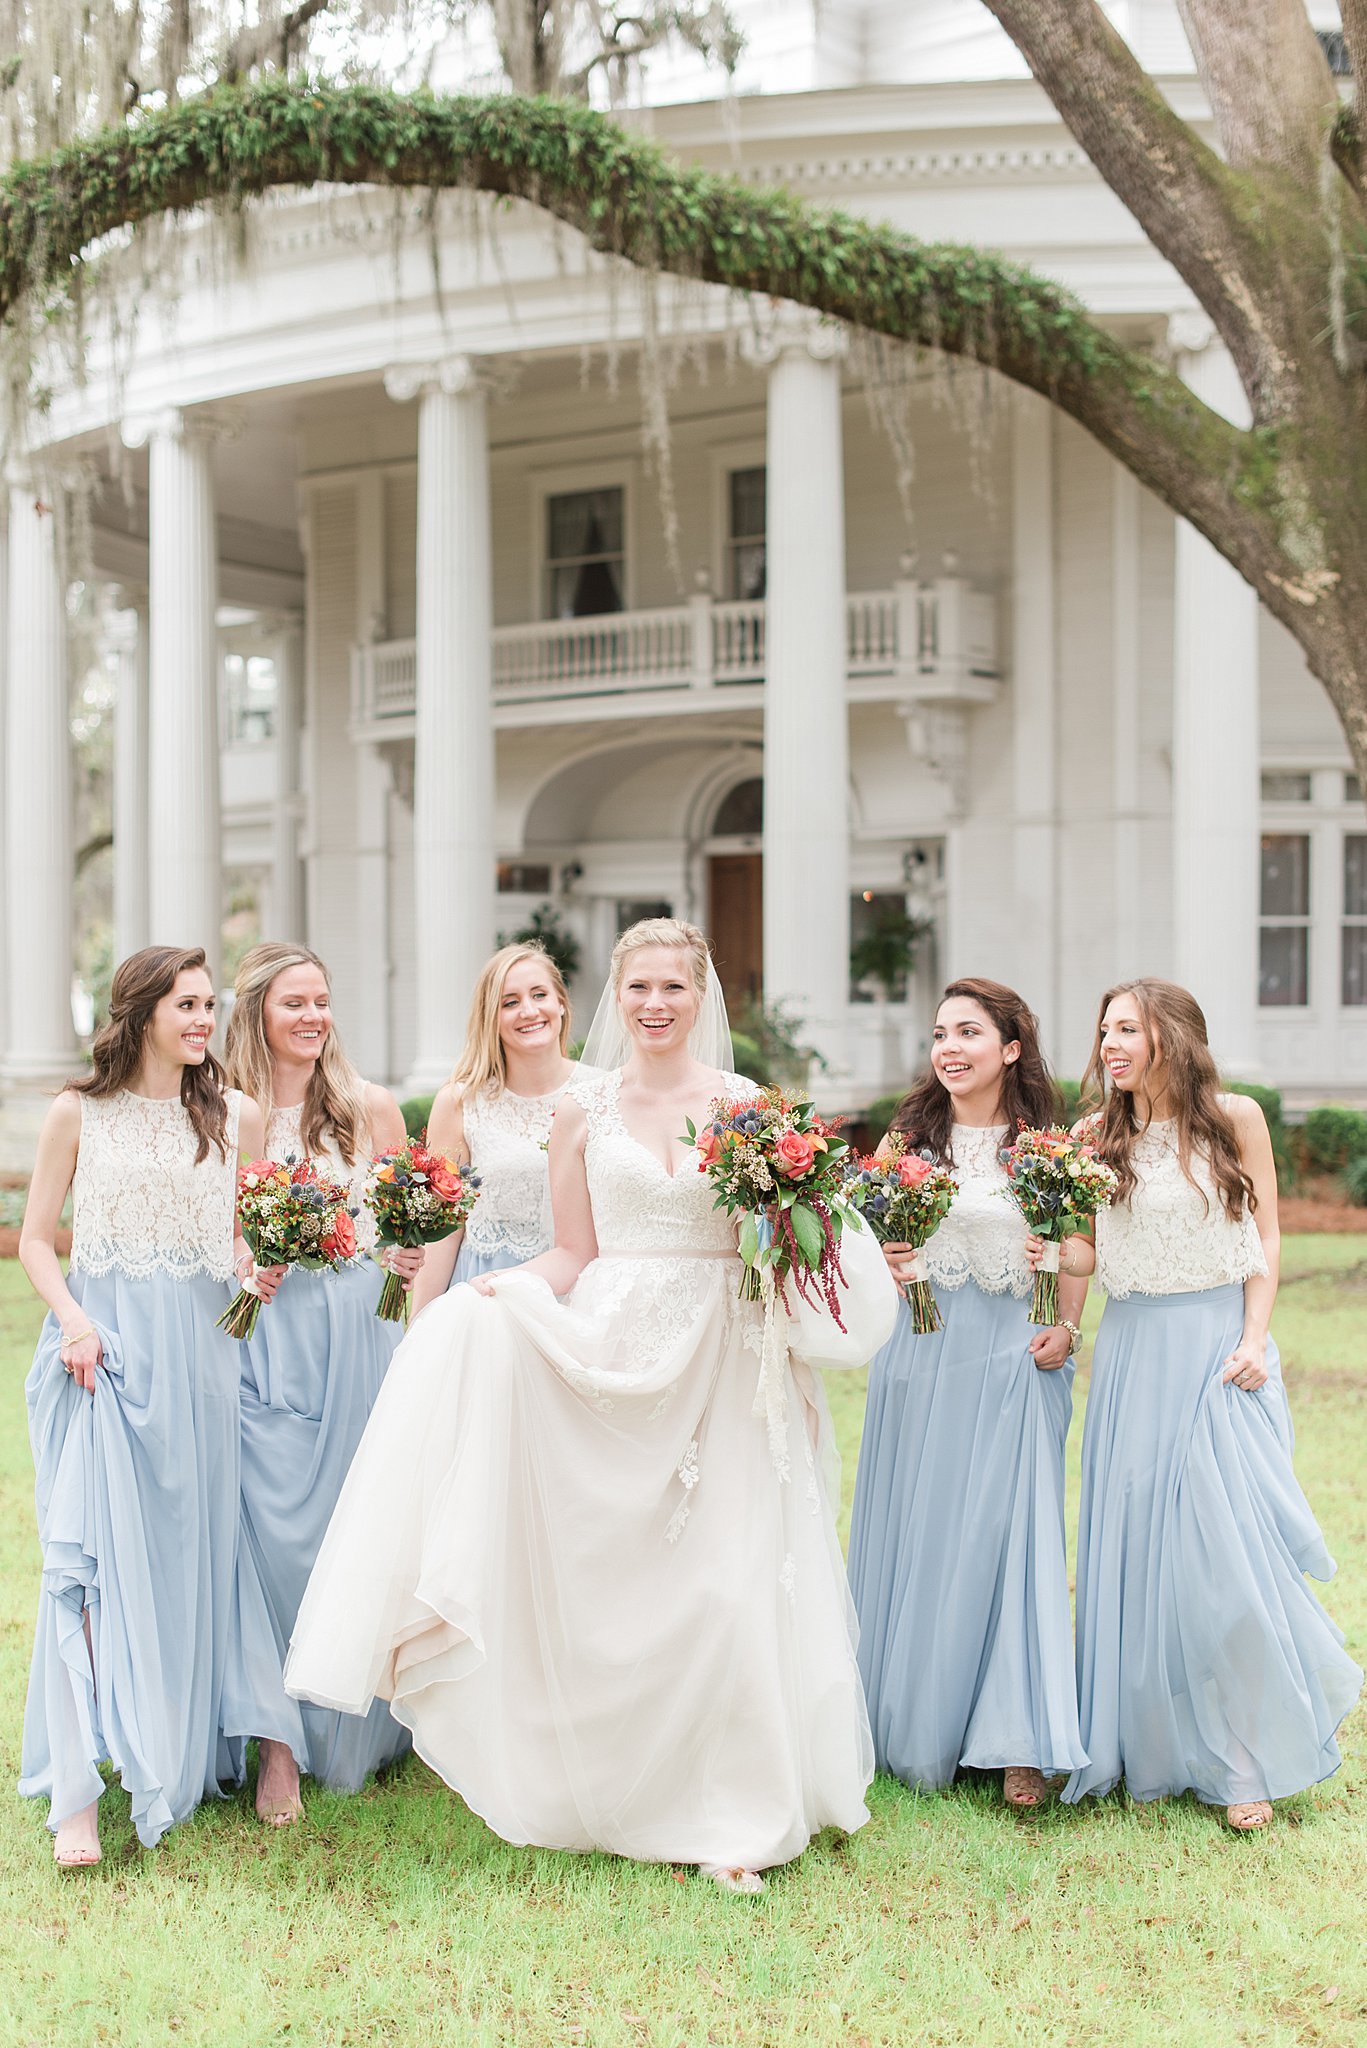 A bride walks through a lawn under oak trees while surrounded by her bridal party in blue and white dresses